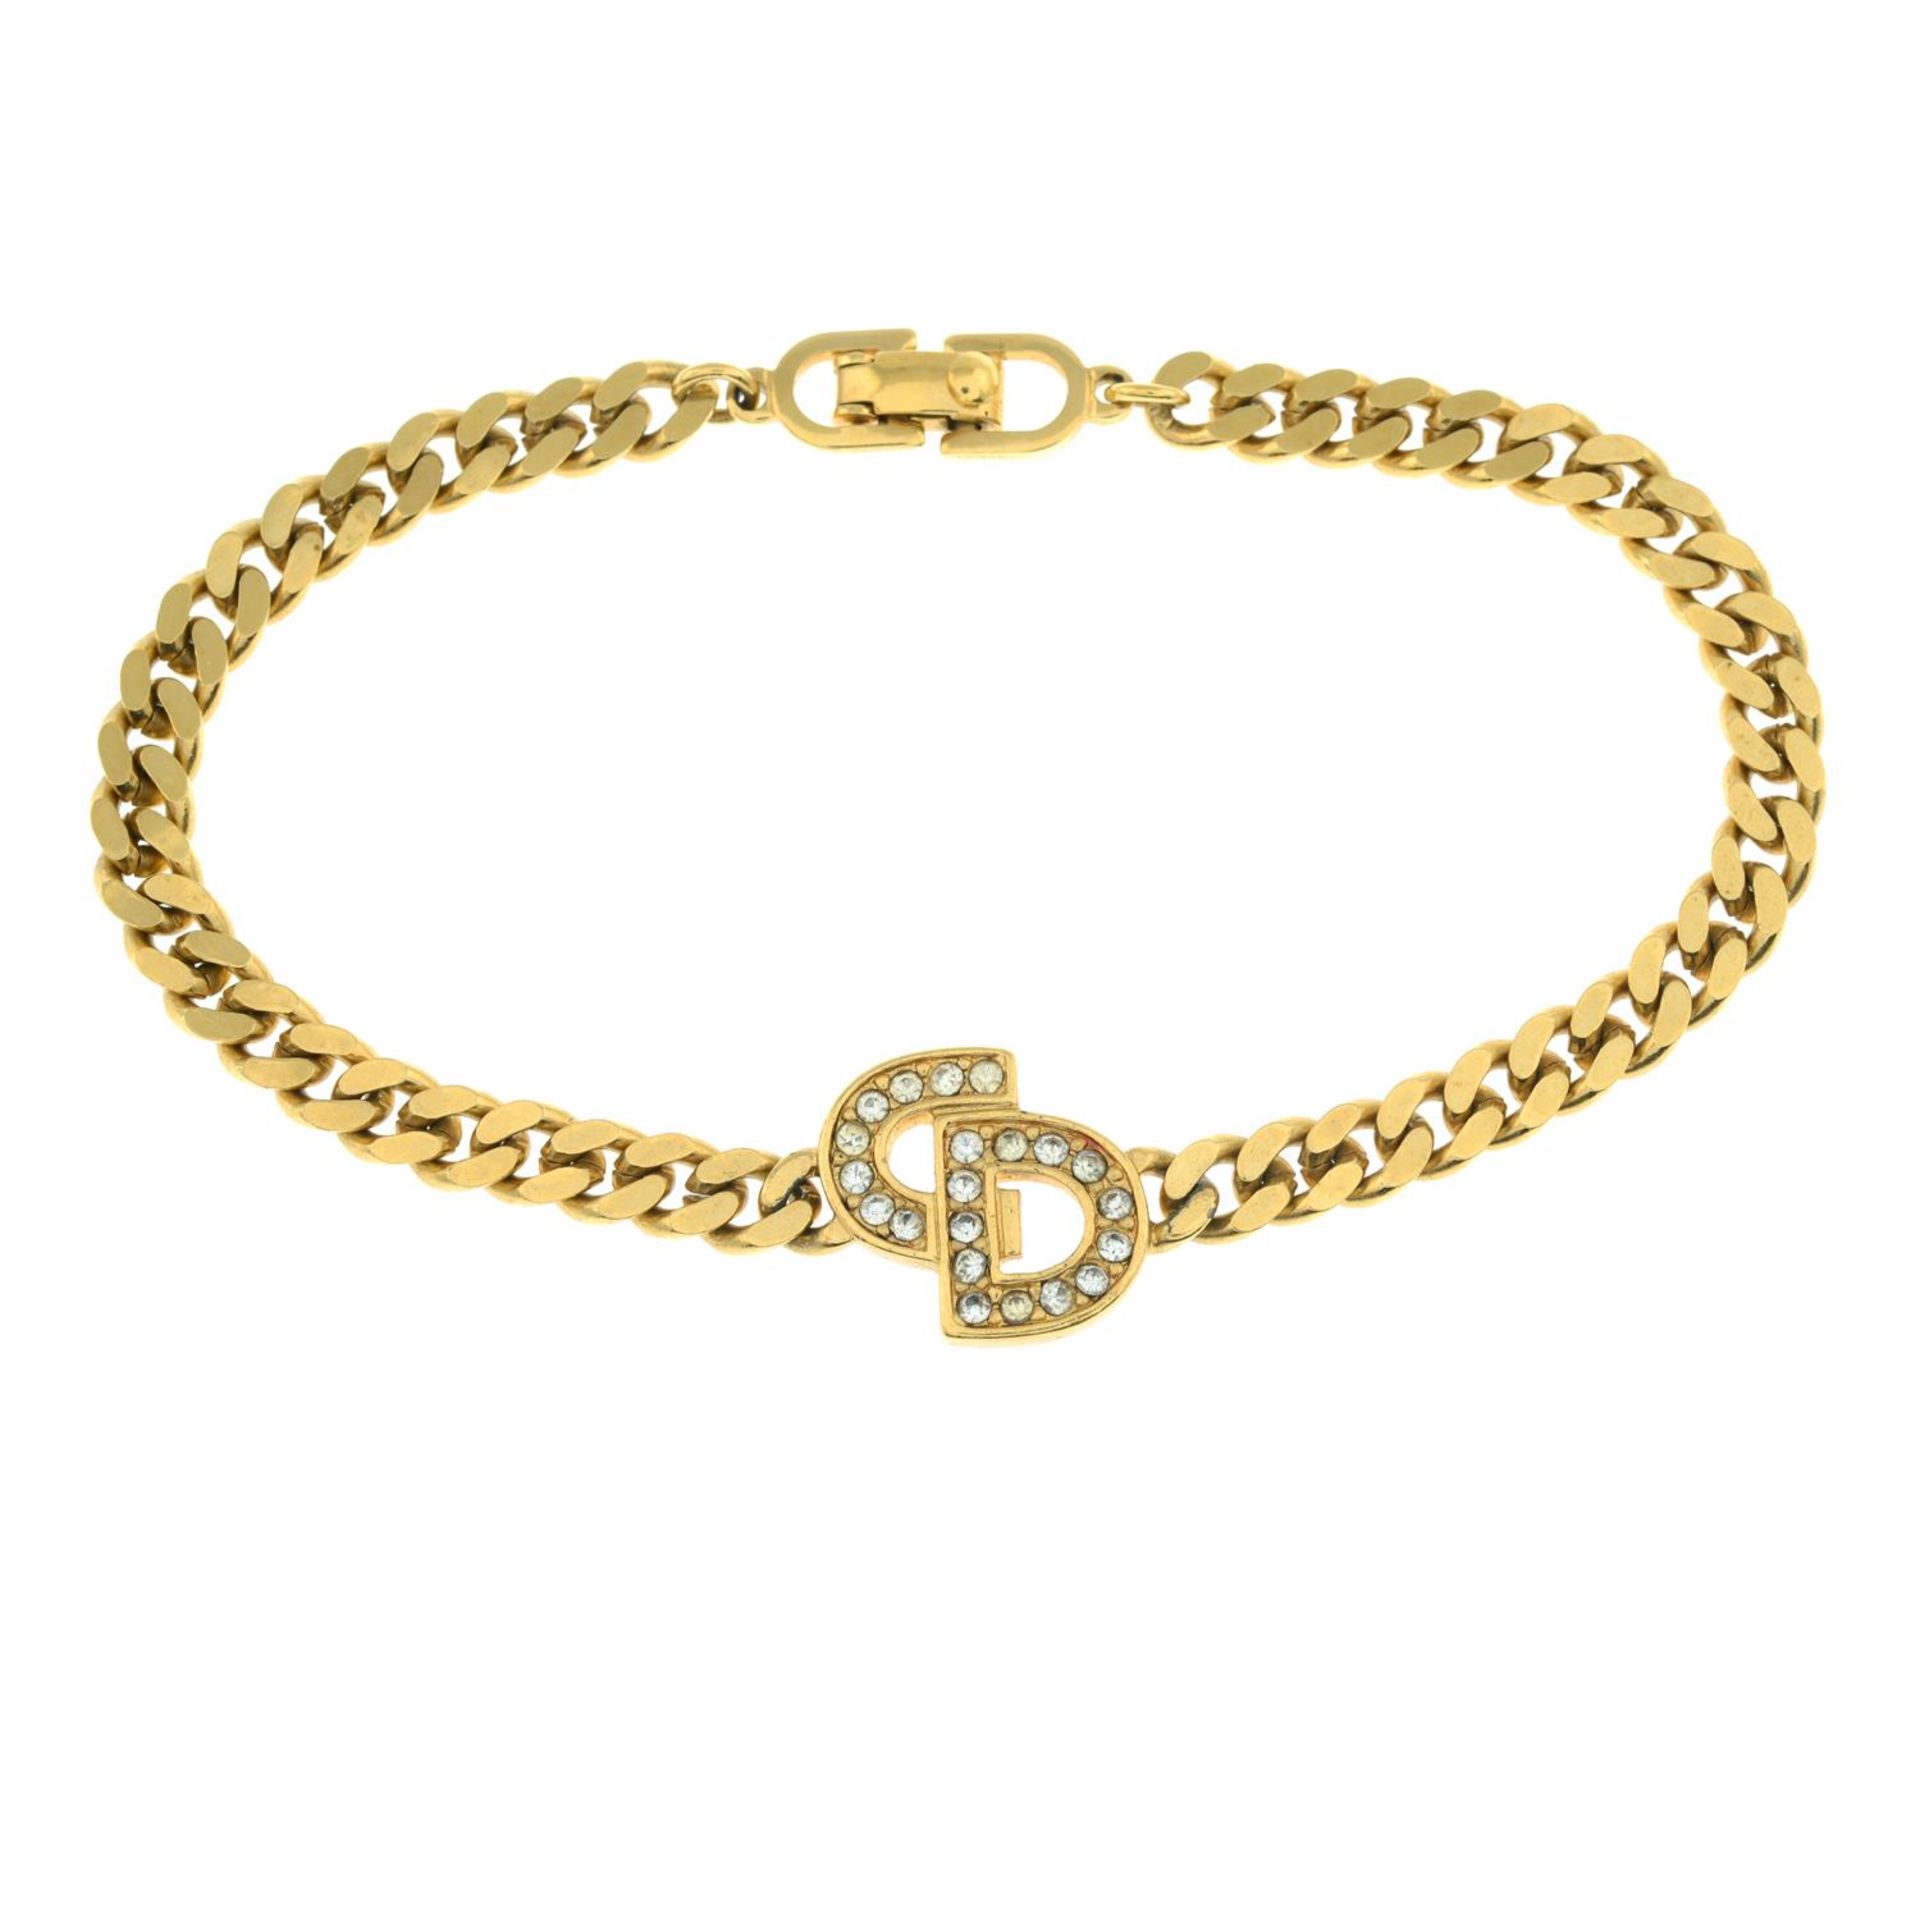 CHRISTIAN DIOR - a chain and paste set bracelet.